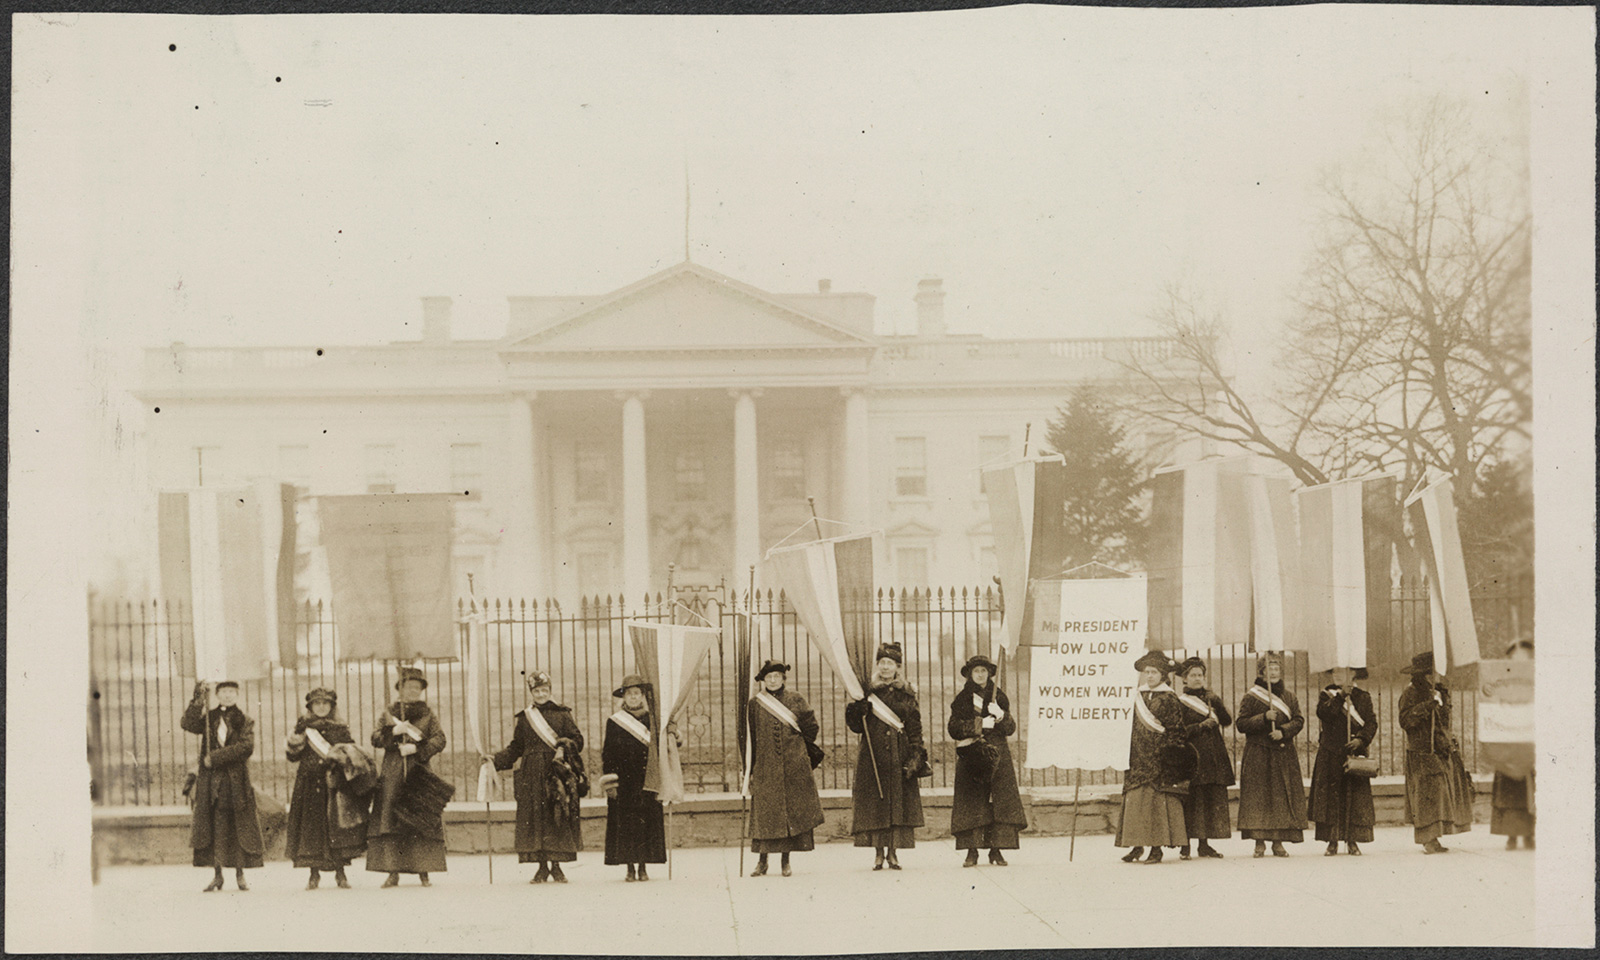 Among the first citizens to protest in front of the White House were suffragists led by Alice Paul. Library of Congress.